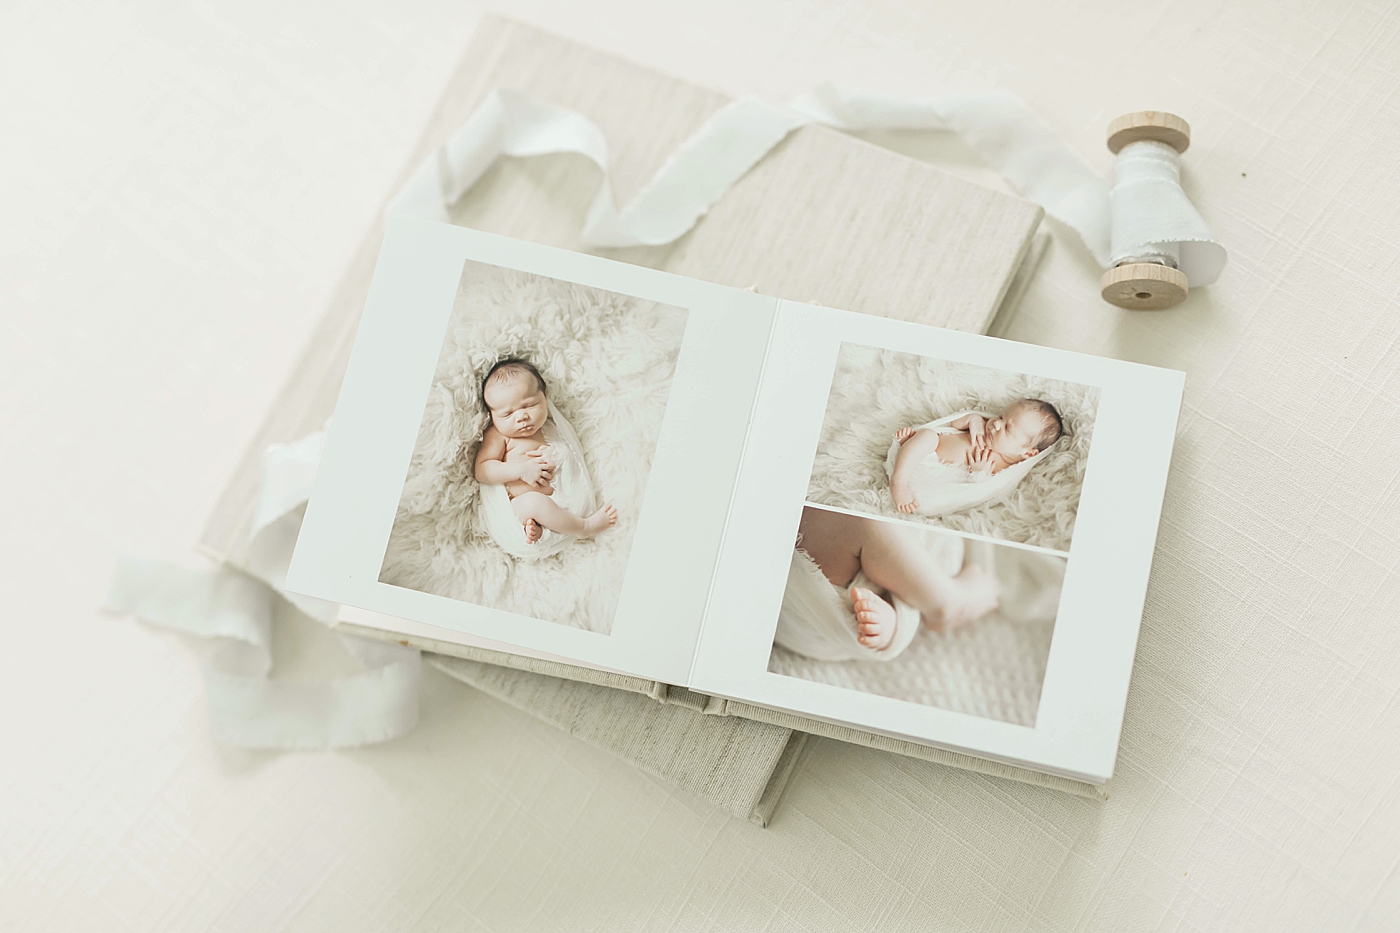 Fresh Light Photography designs beautiful album during design and ordering appointment with newborn client.